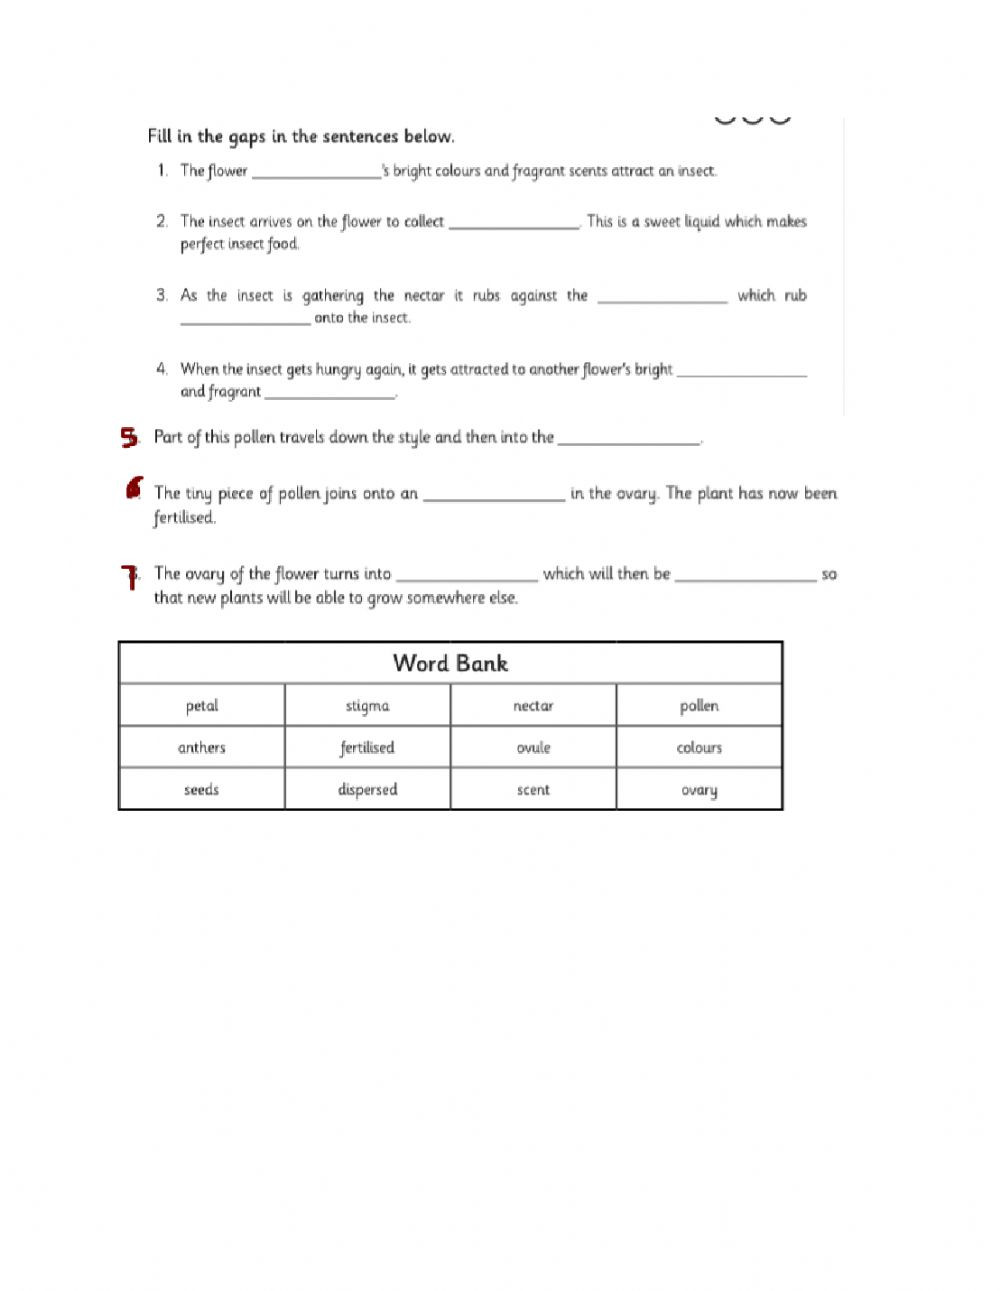 Composition Of Matter Worksheet Answers Pollination Process Interactive Worksheet